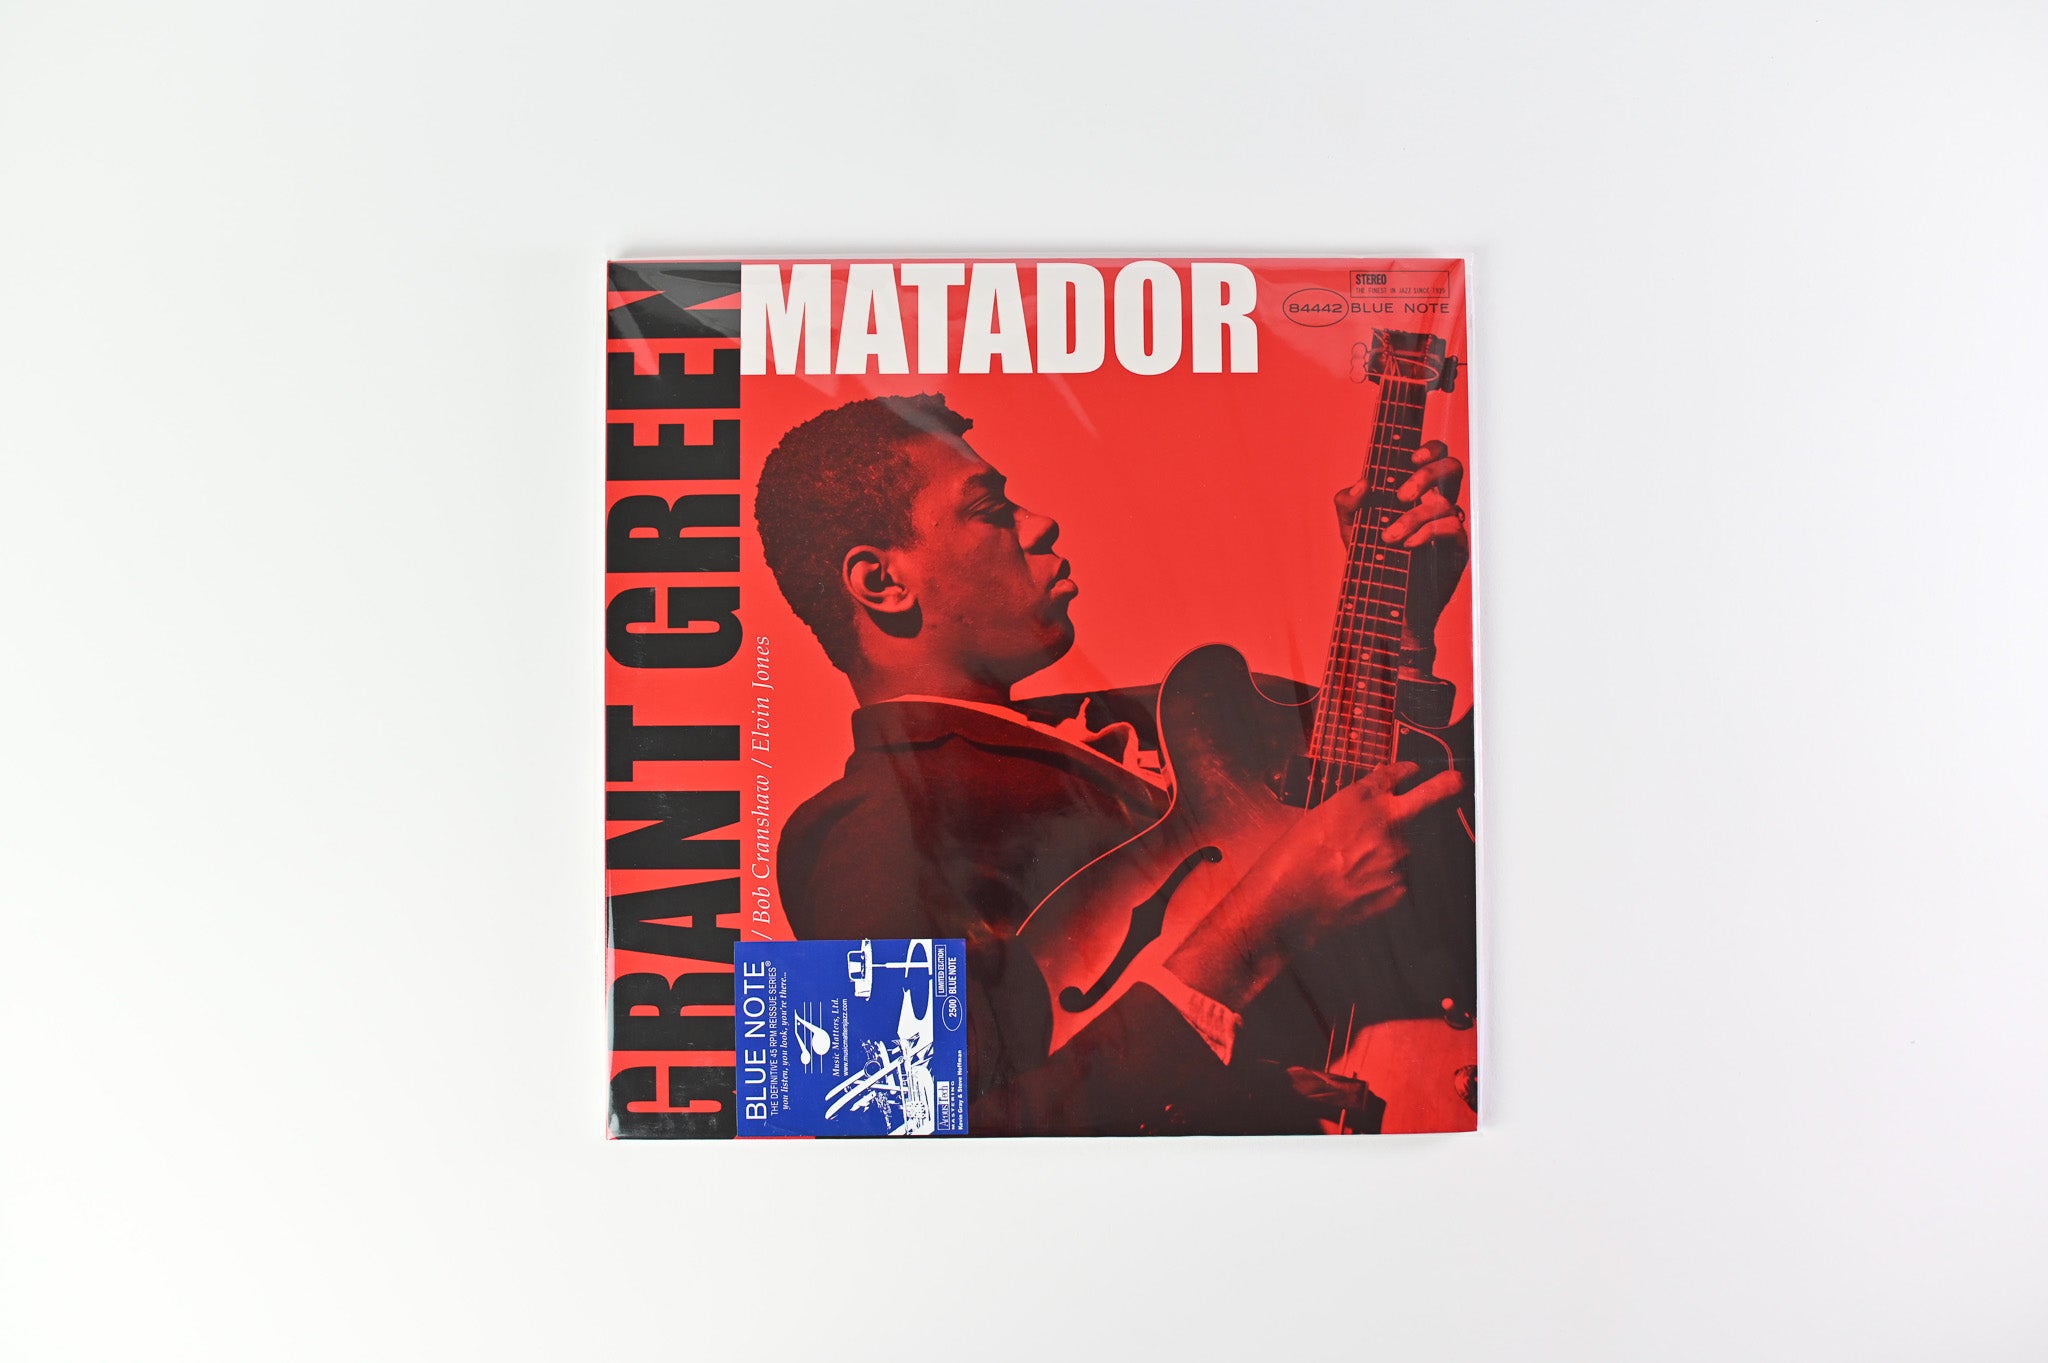 Grant Green - Matador on Blue Note Music Matters Ltd Numbered Reissue 45 RPM